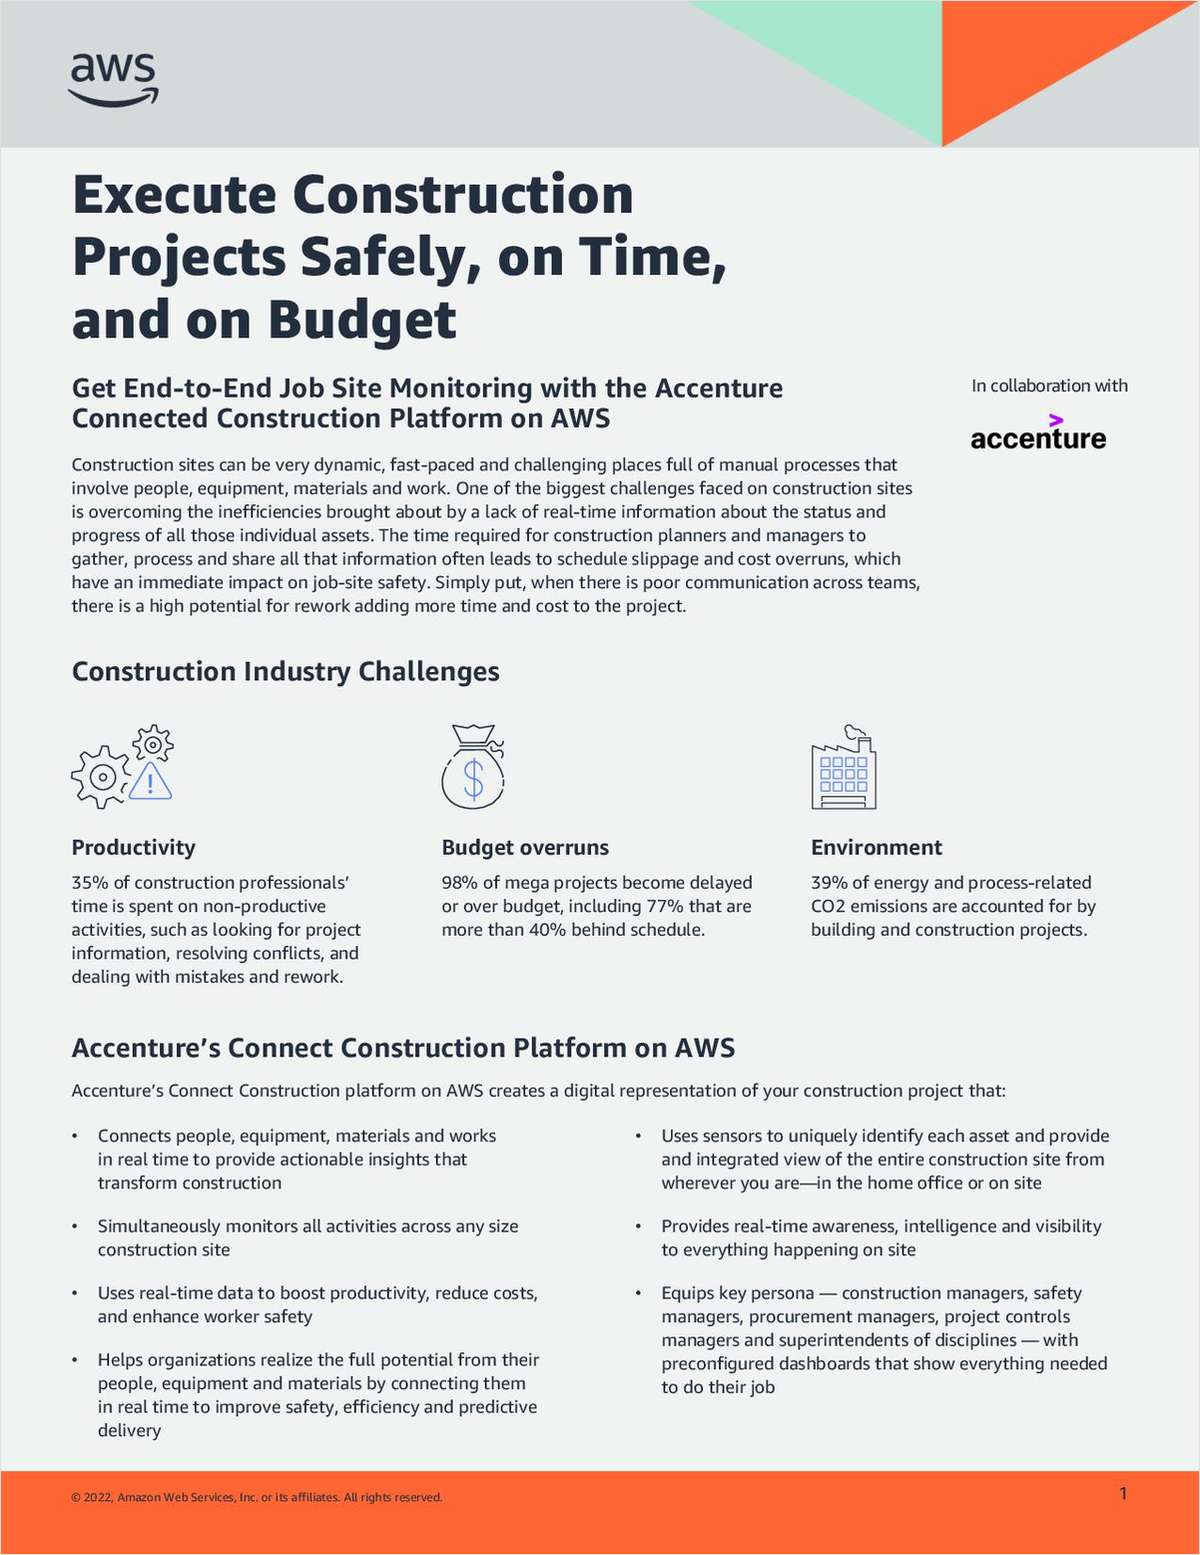 Execute Construction Projects Safely, on Time, and on Budget